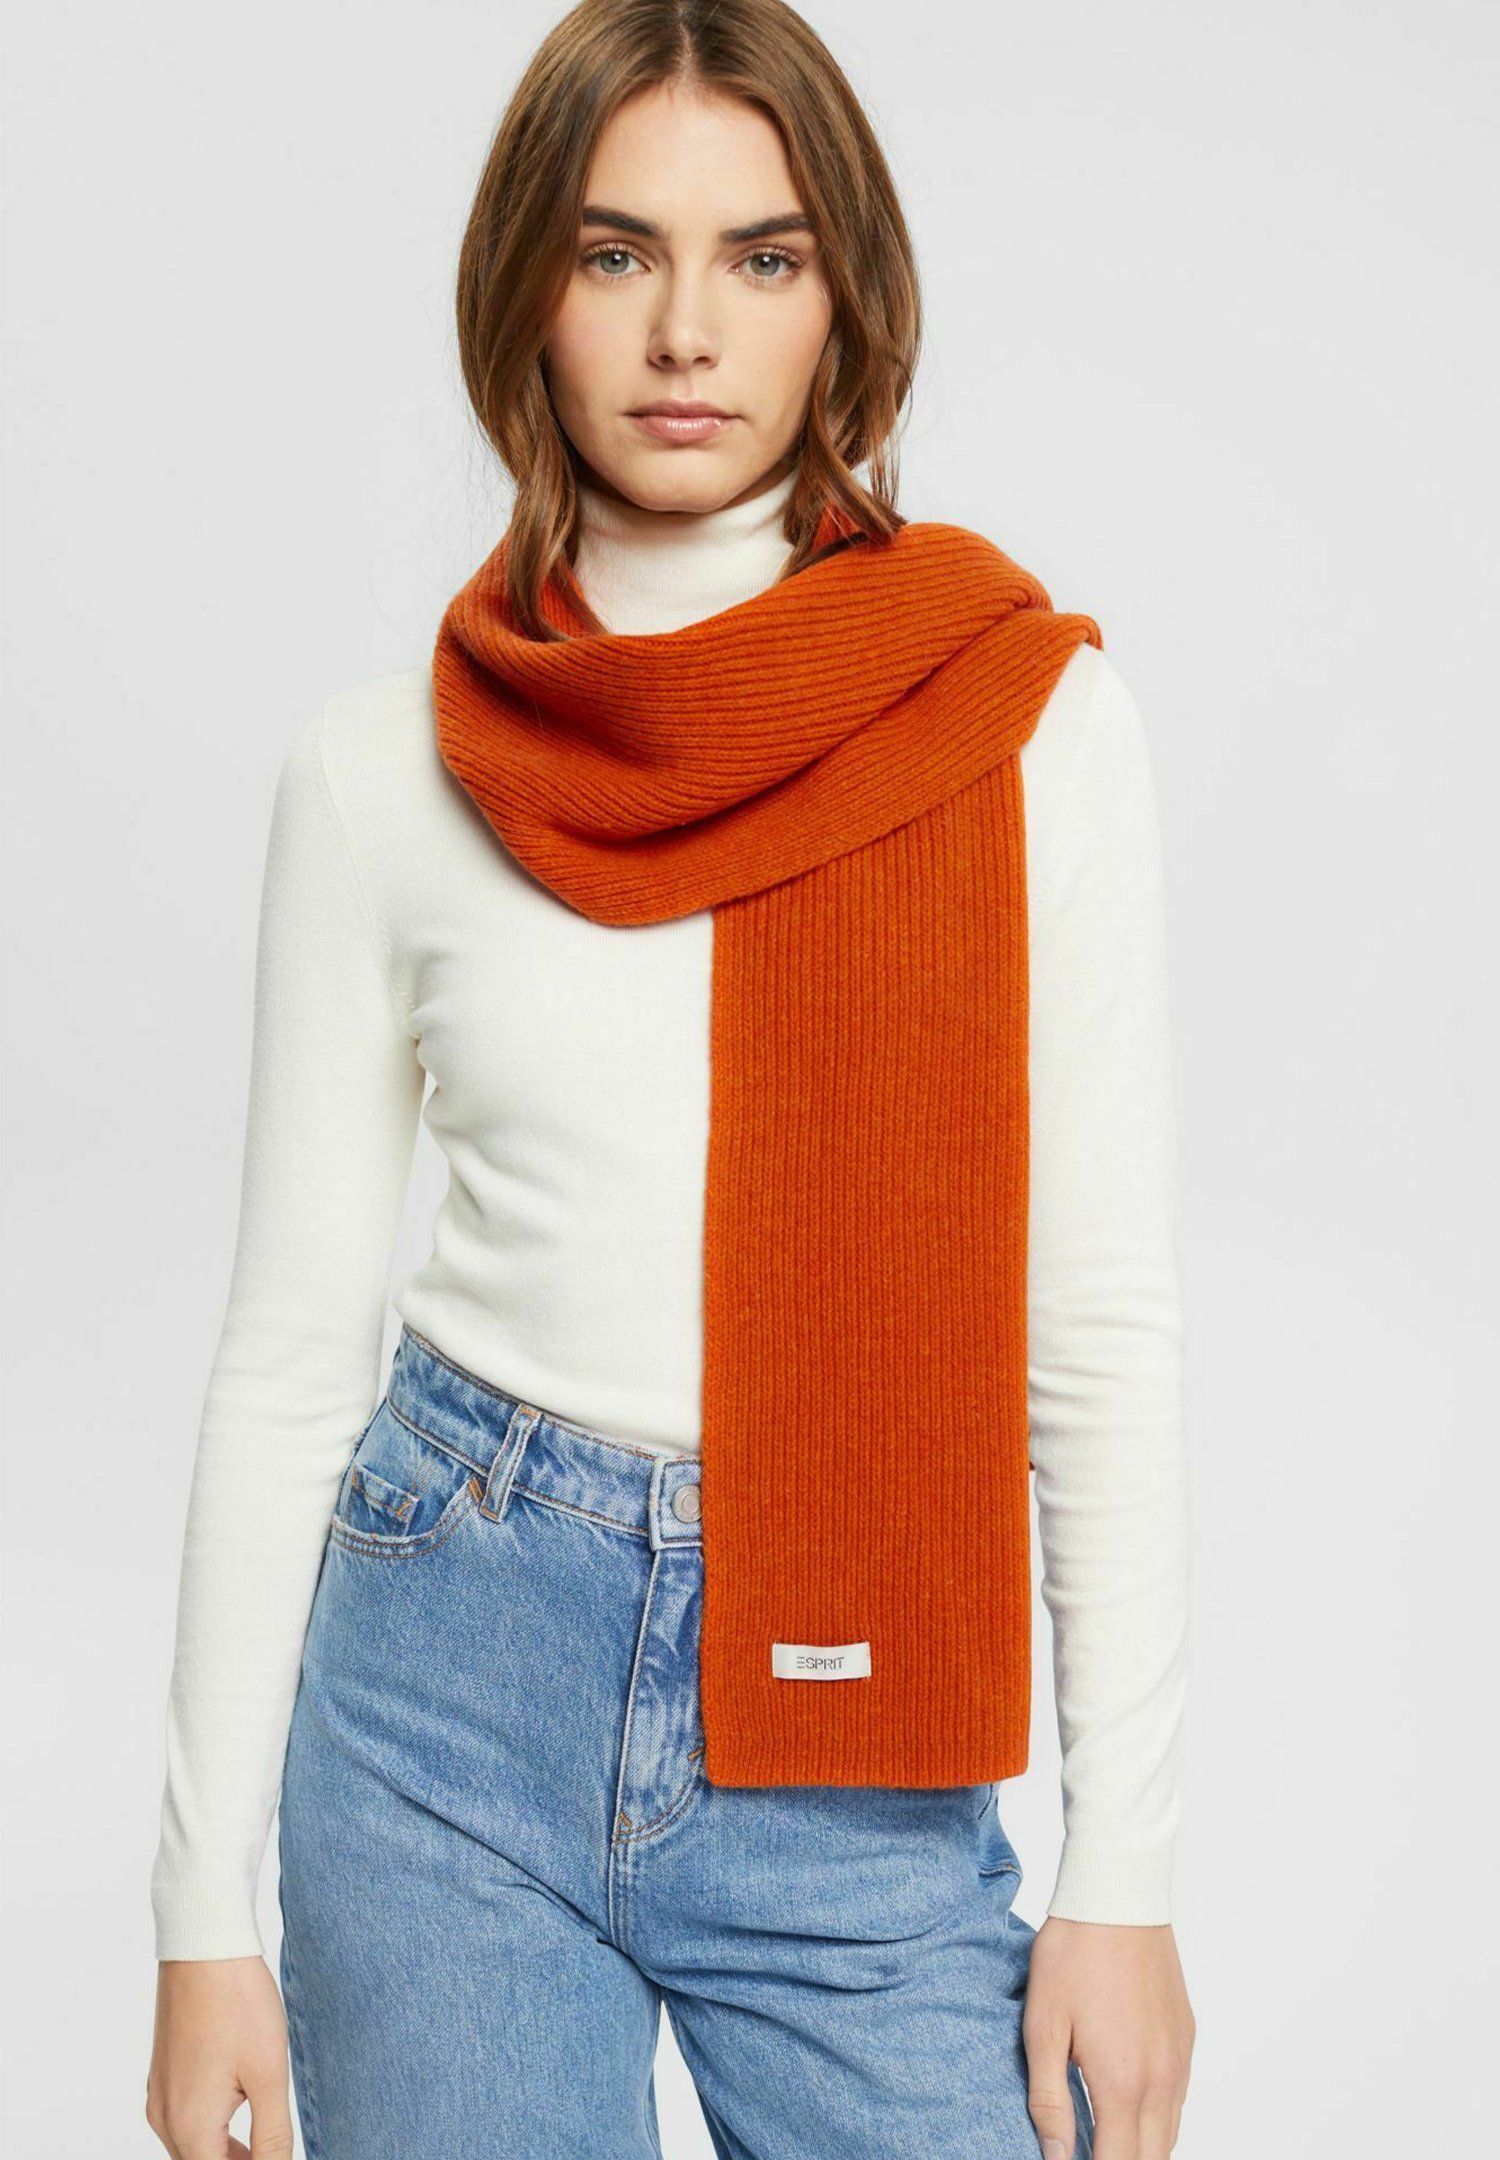 How to Wear Orange Scarf: Best 13 Cheerful & Lovely Outfit Ideas for Women